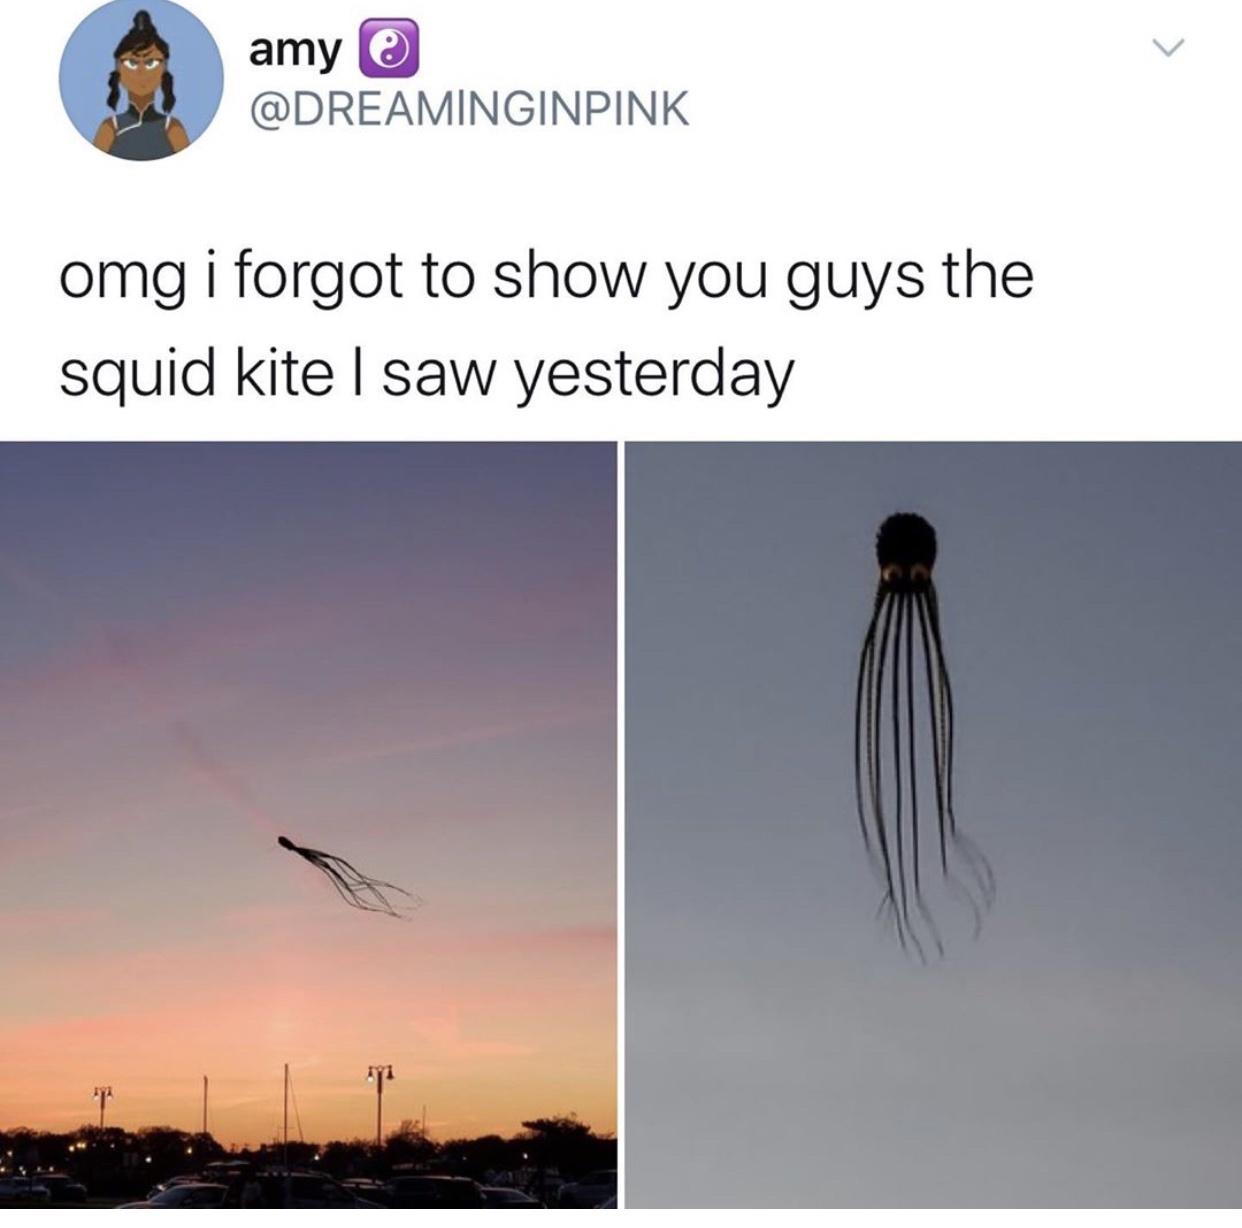 sky - amy e omg i forgot to show you guys the squid kite I saw yesterday